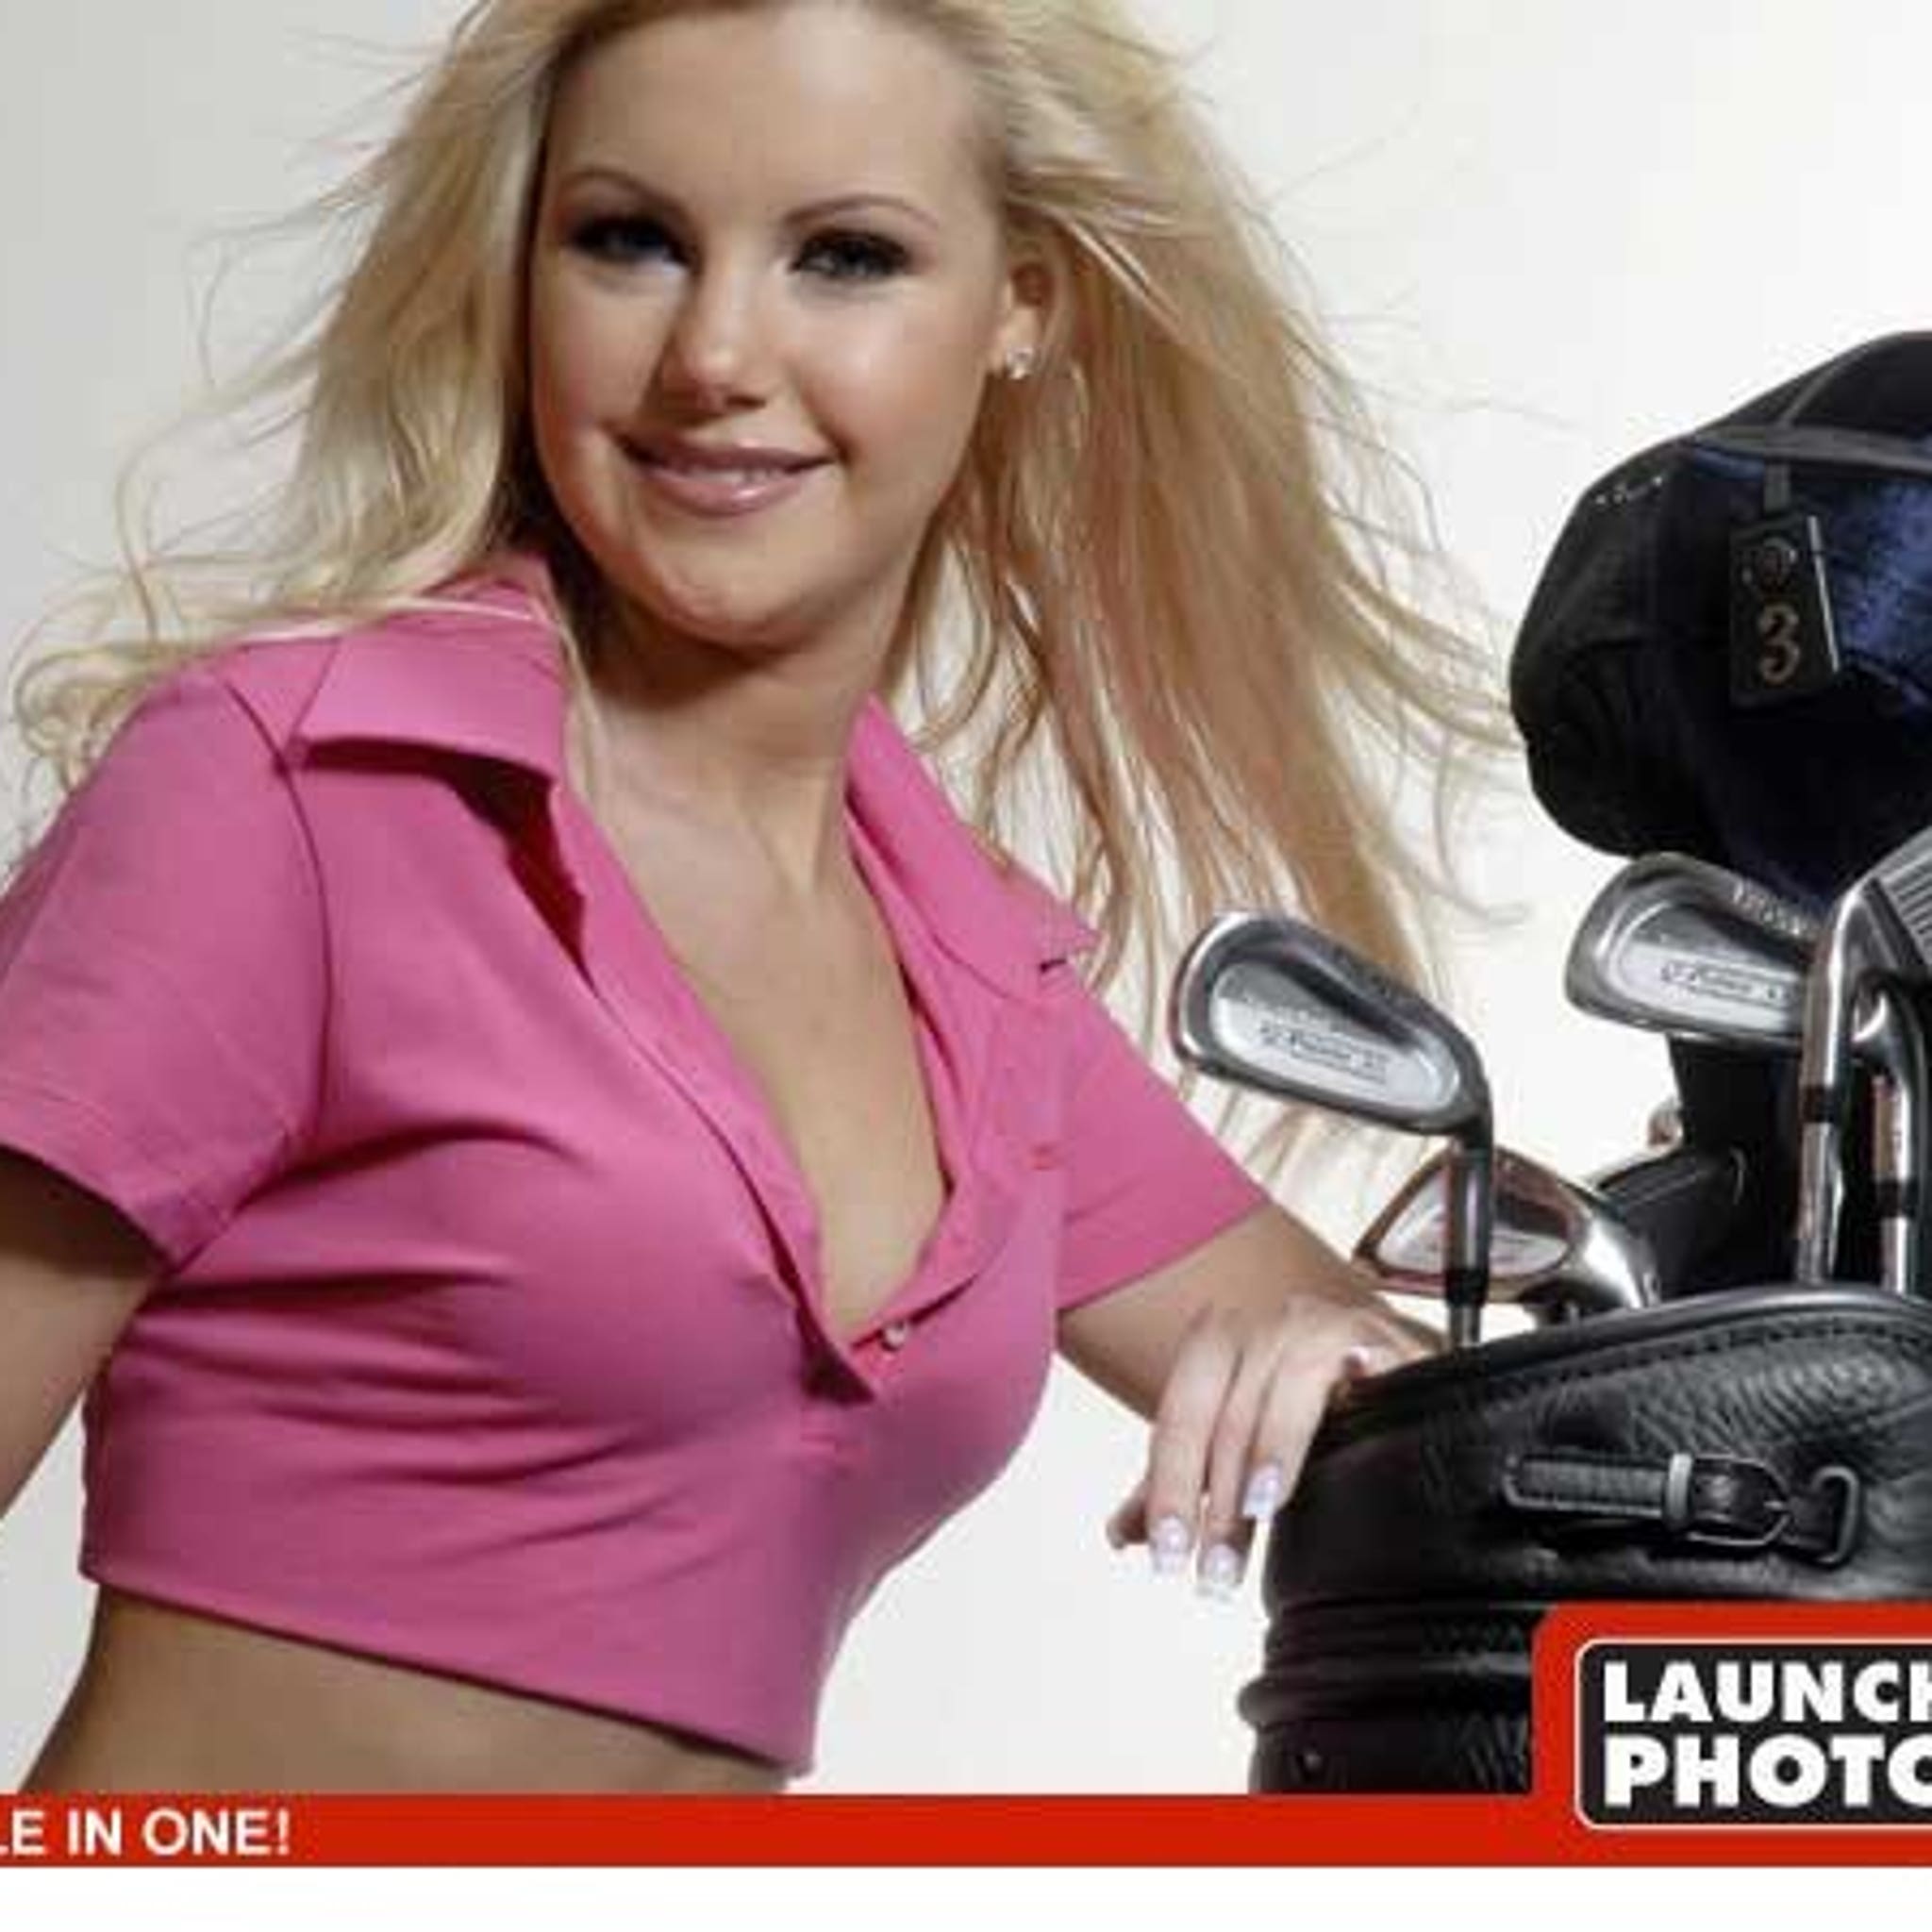 One Tiger Woods Alleged Mistress a Real Swinger